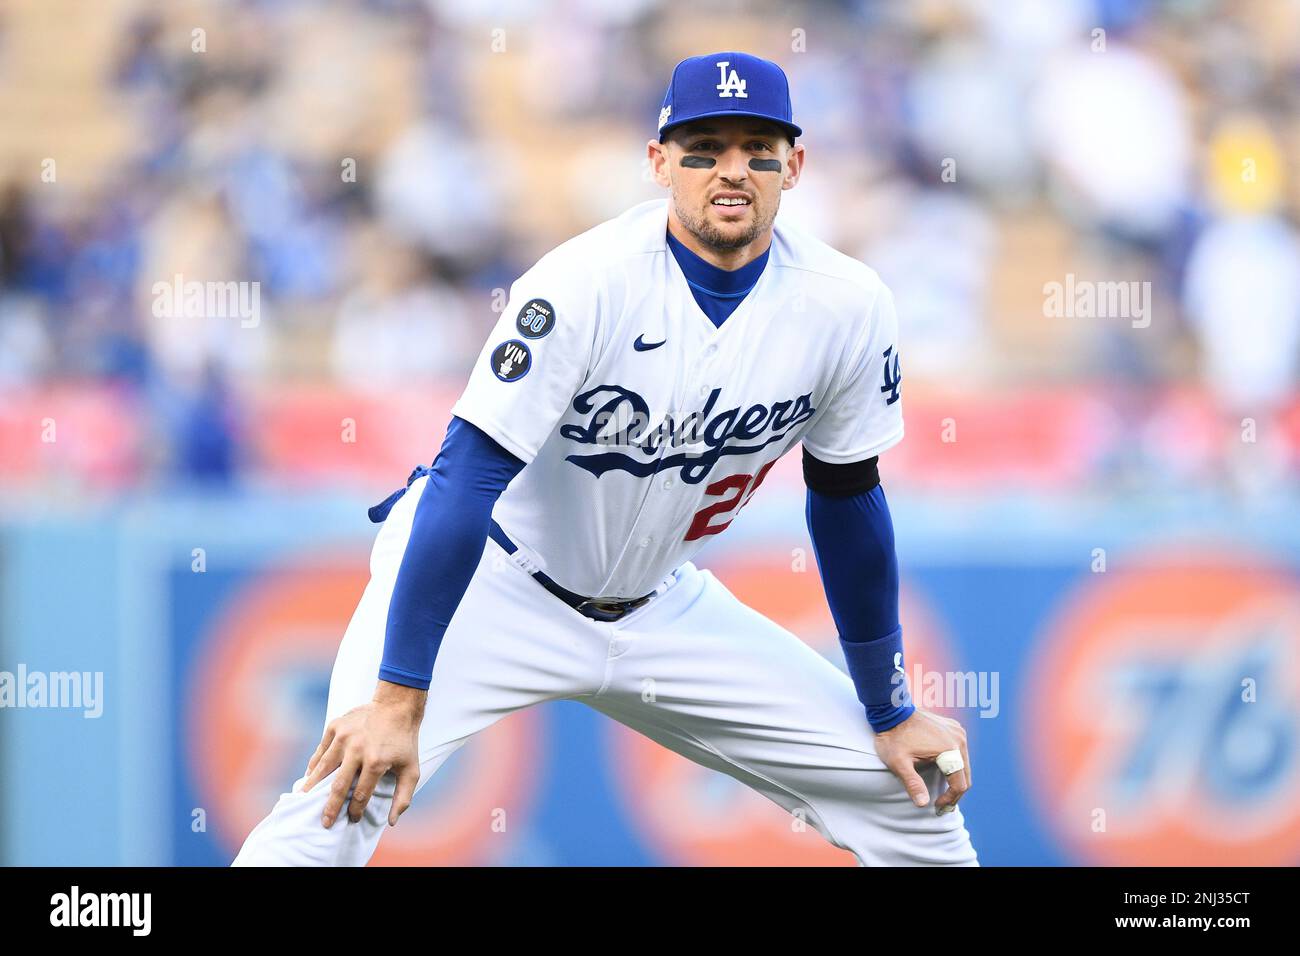 Los Angeles Dodgers center fielder Trayce Thompson looks on during